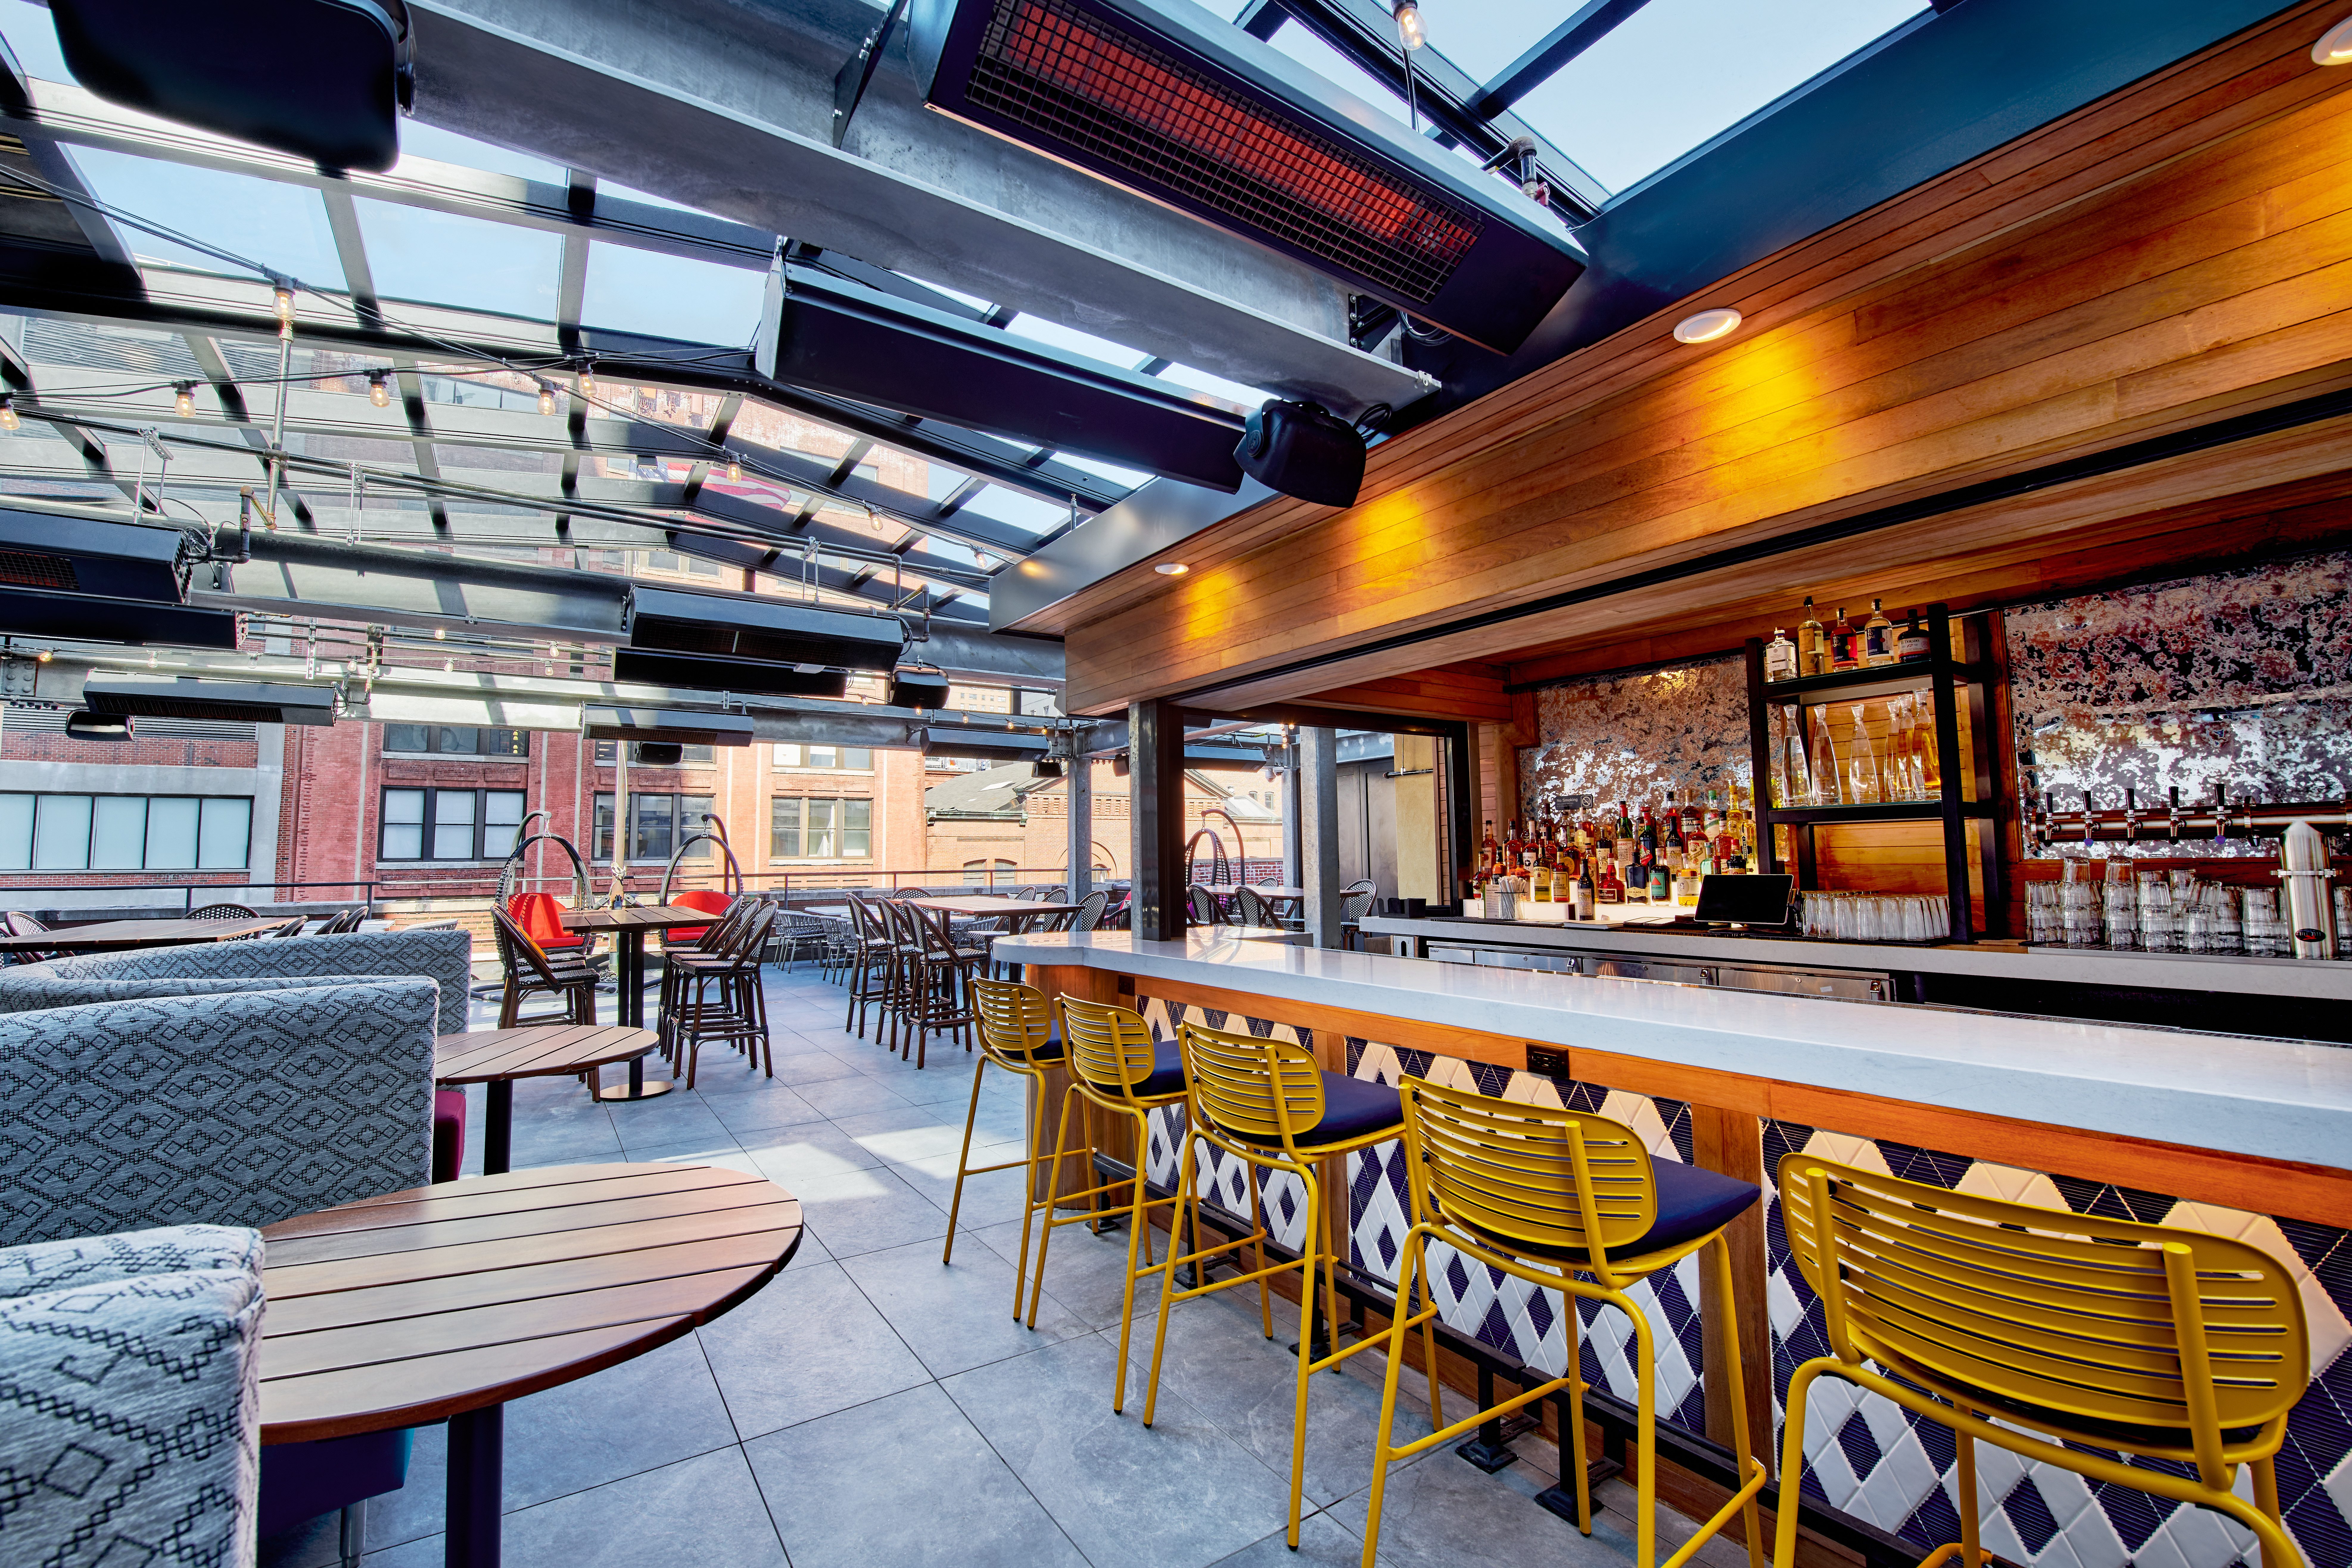 http://skyline,%20rooftop,%20views,%20soft%20seating,%20comfy%20seating,%20outdoor%20seating,%20rooftop%20bar%20seating